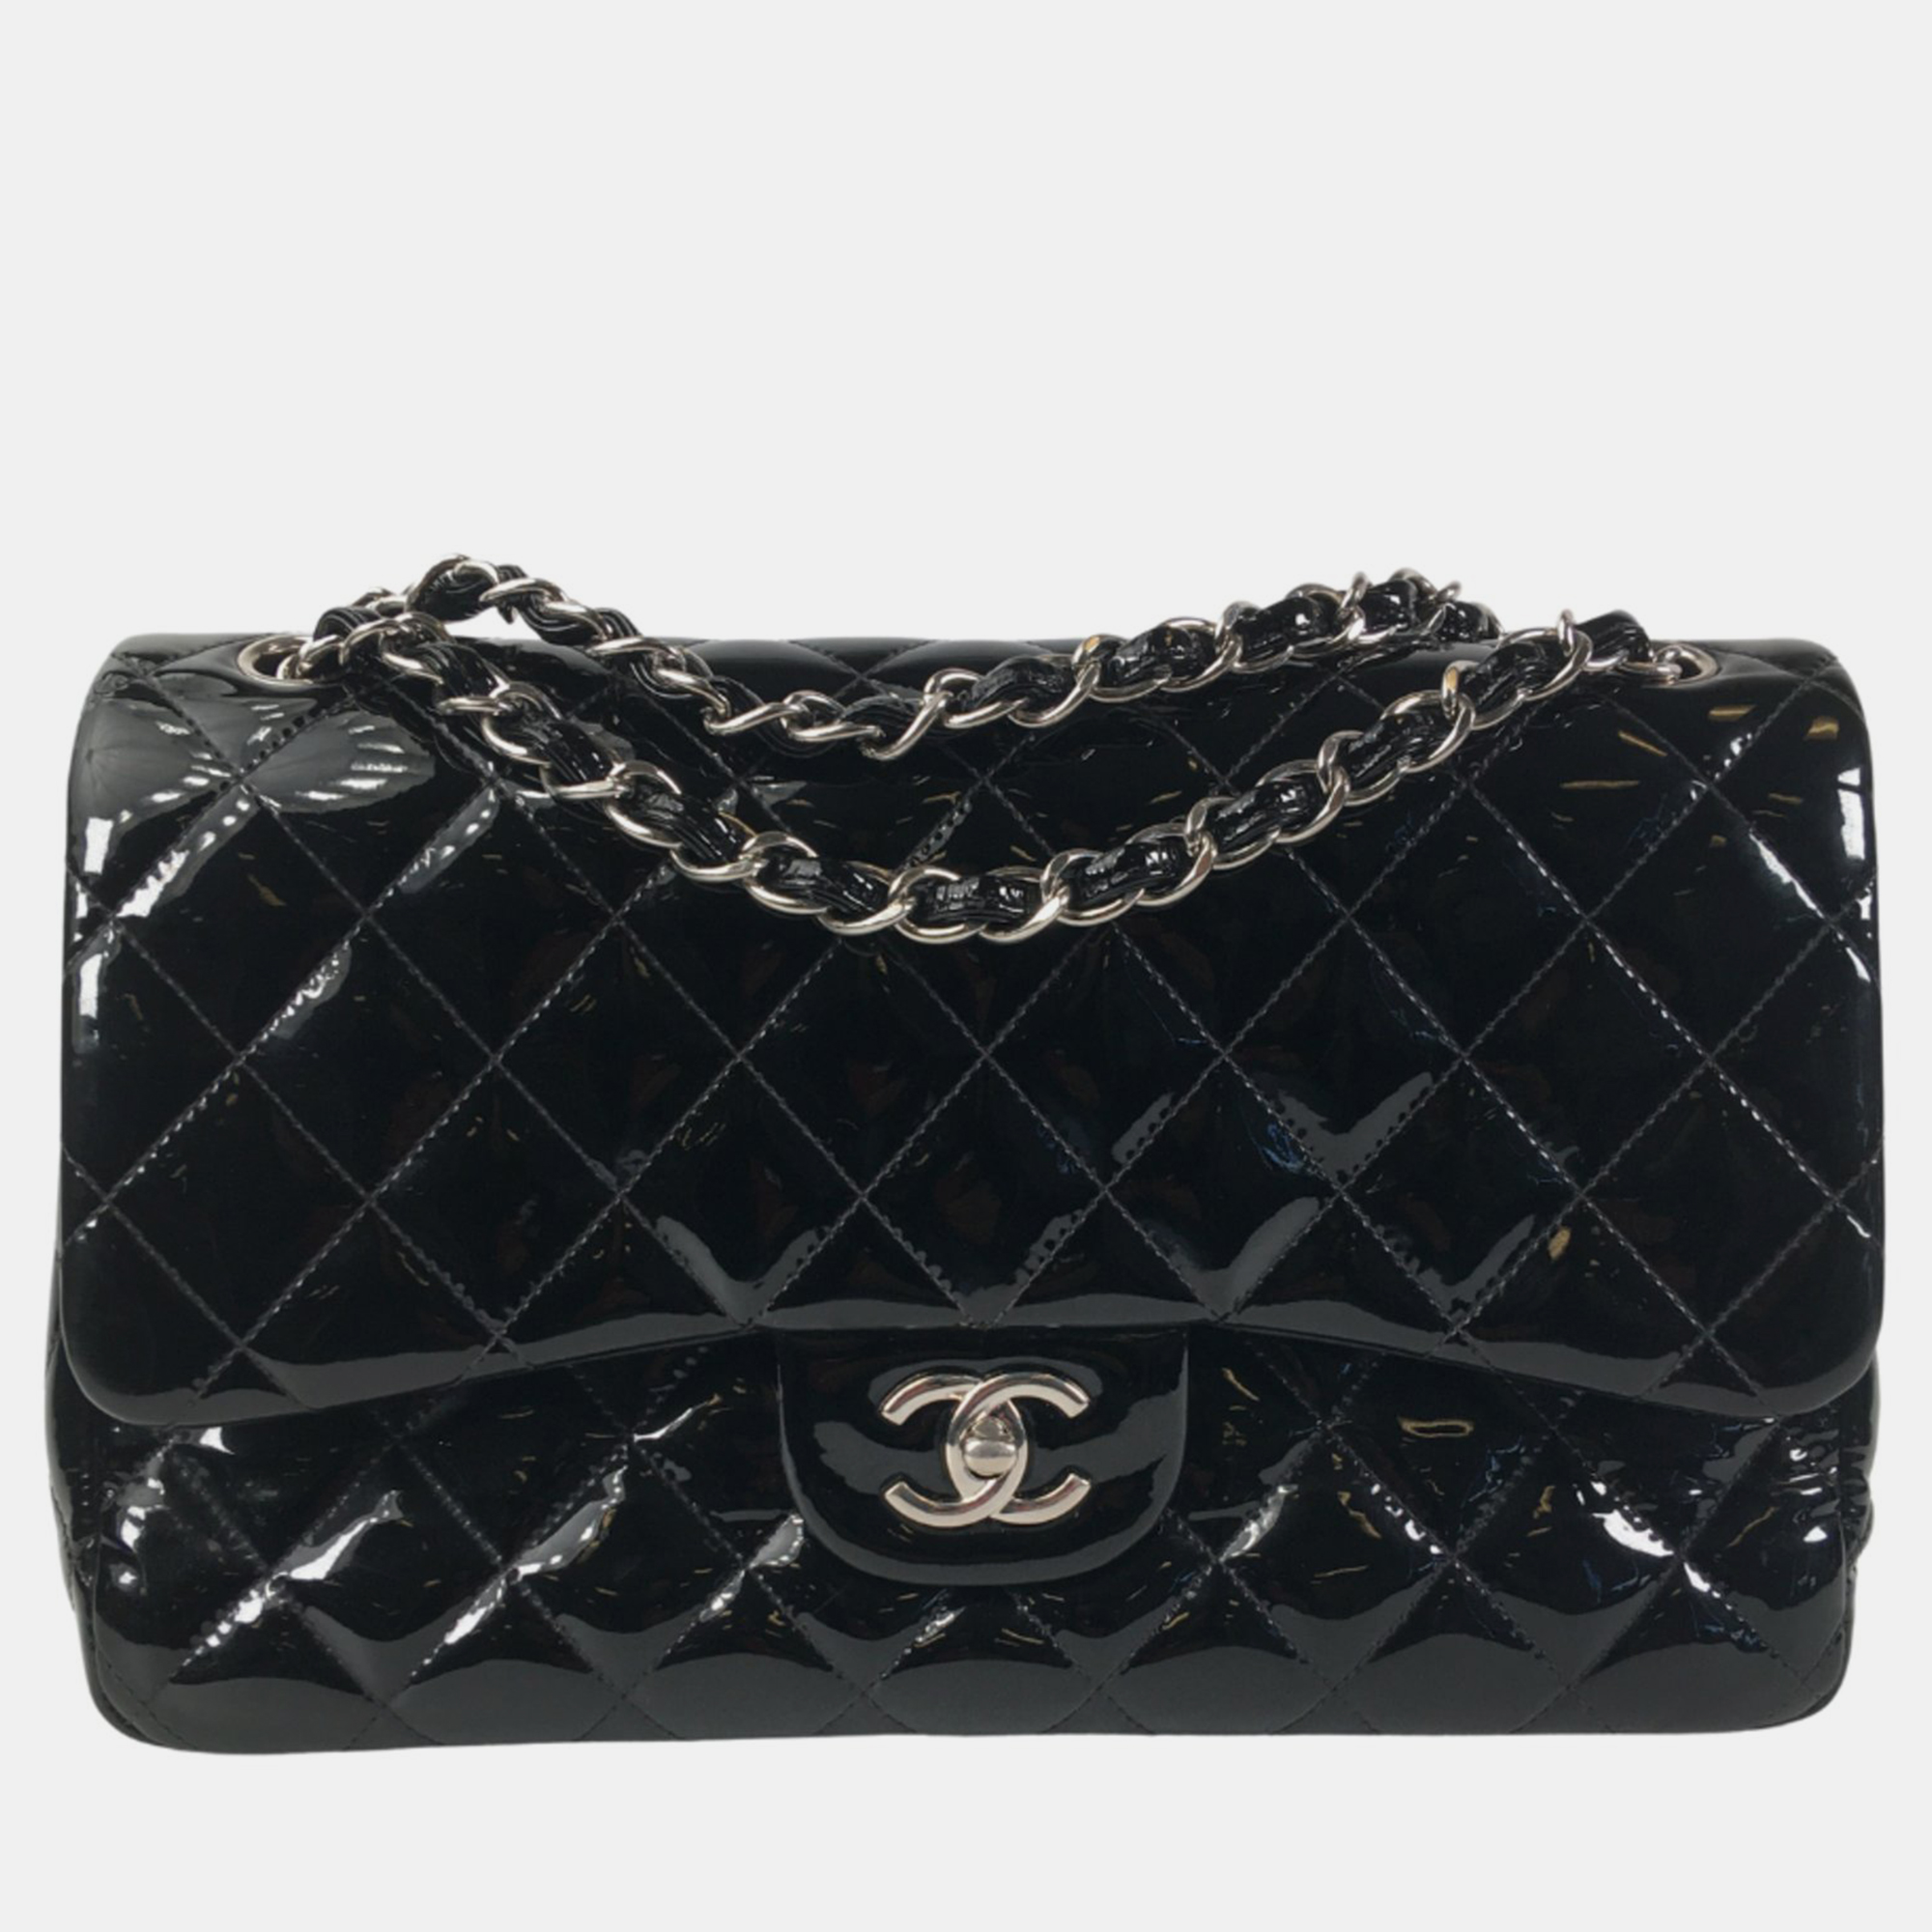 Chanel black patent leather jumbo classic double flap shoulder bags